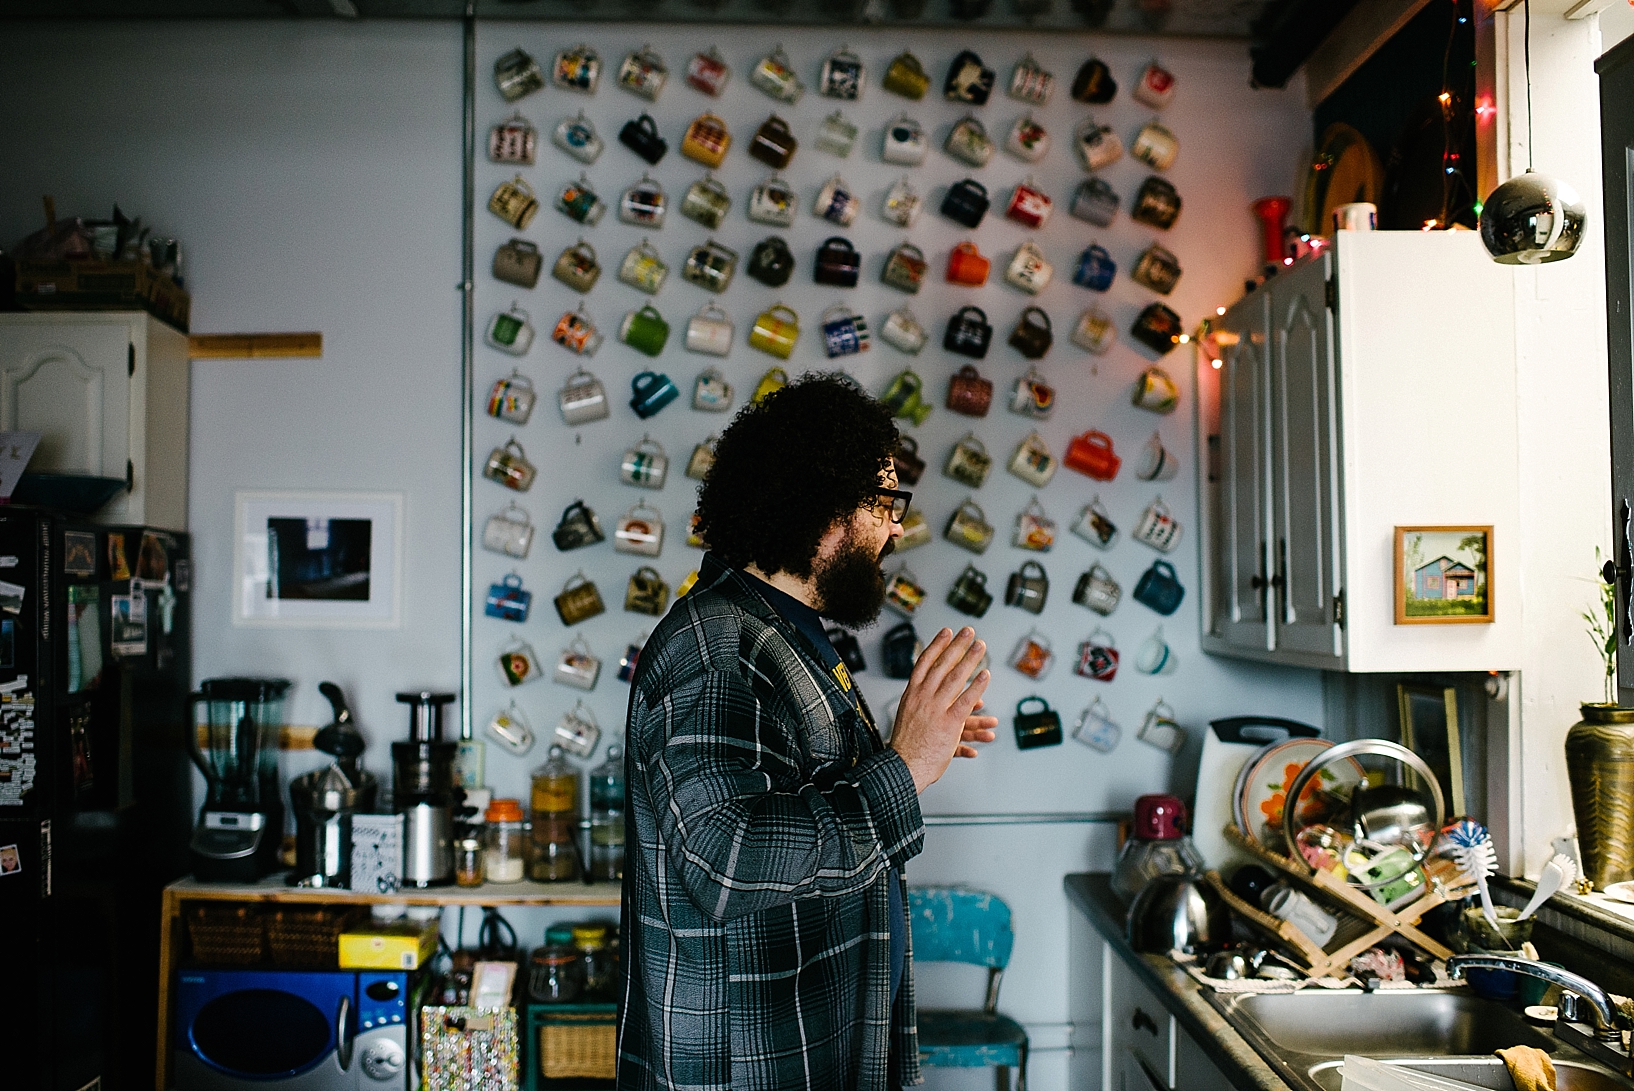 man with curly hair and beard standing in kitchen in front of mug wall